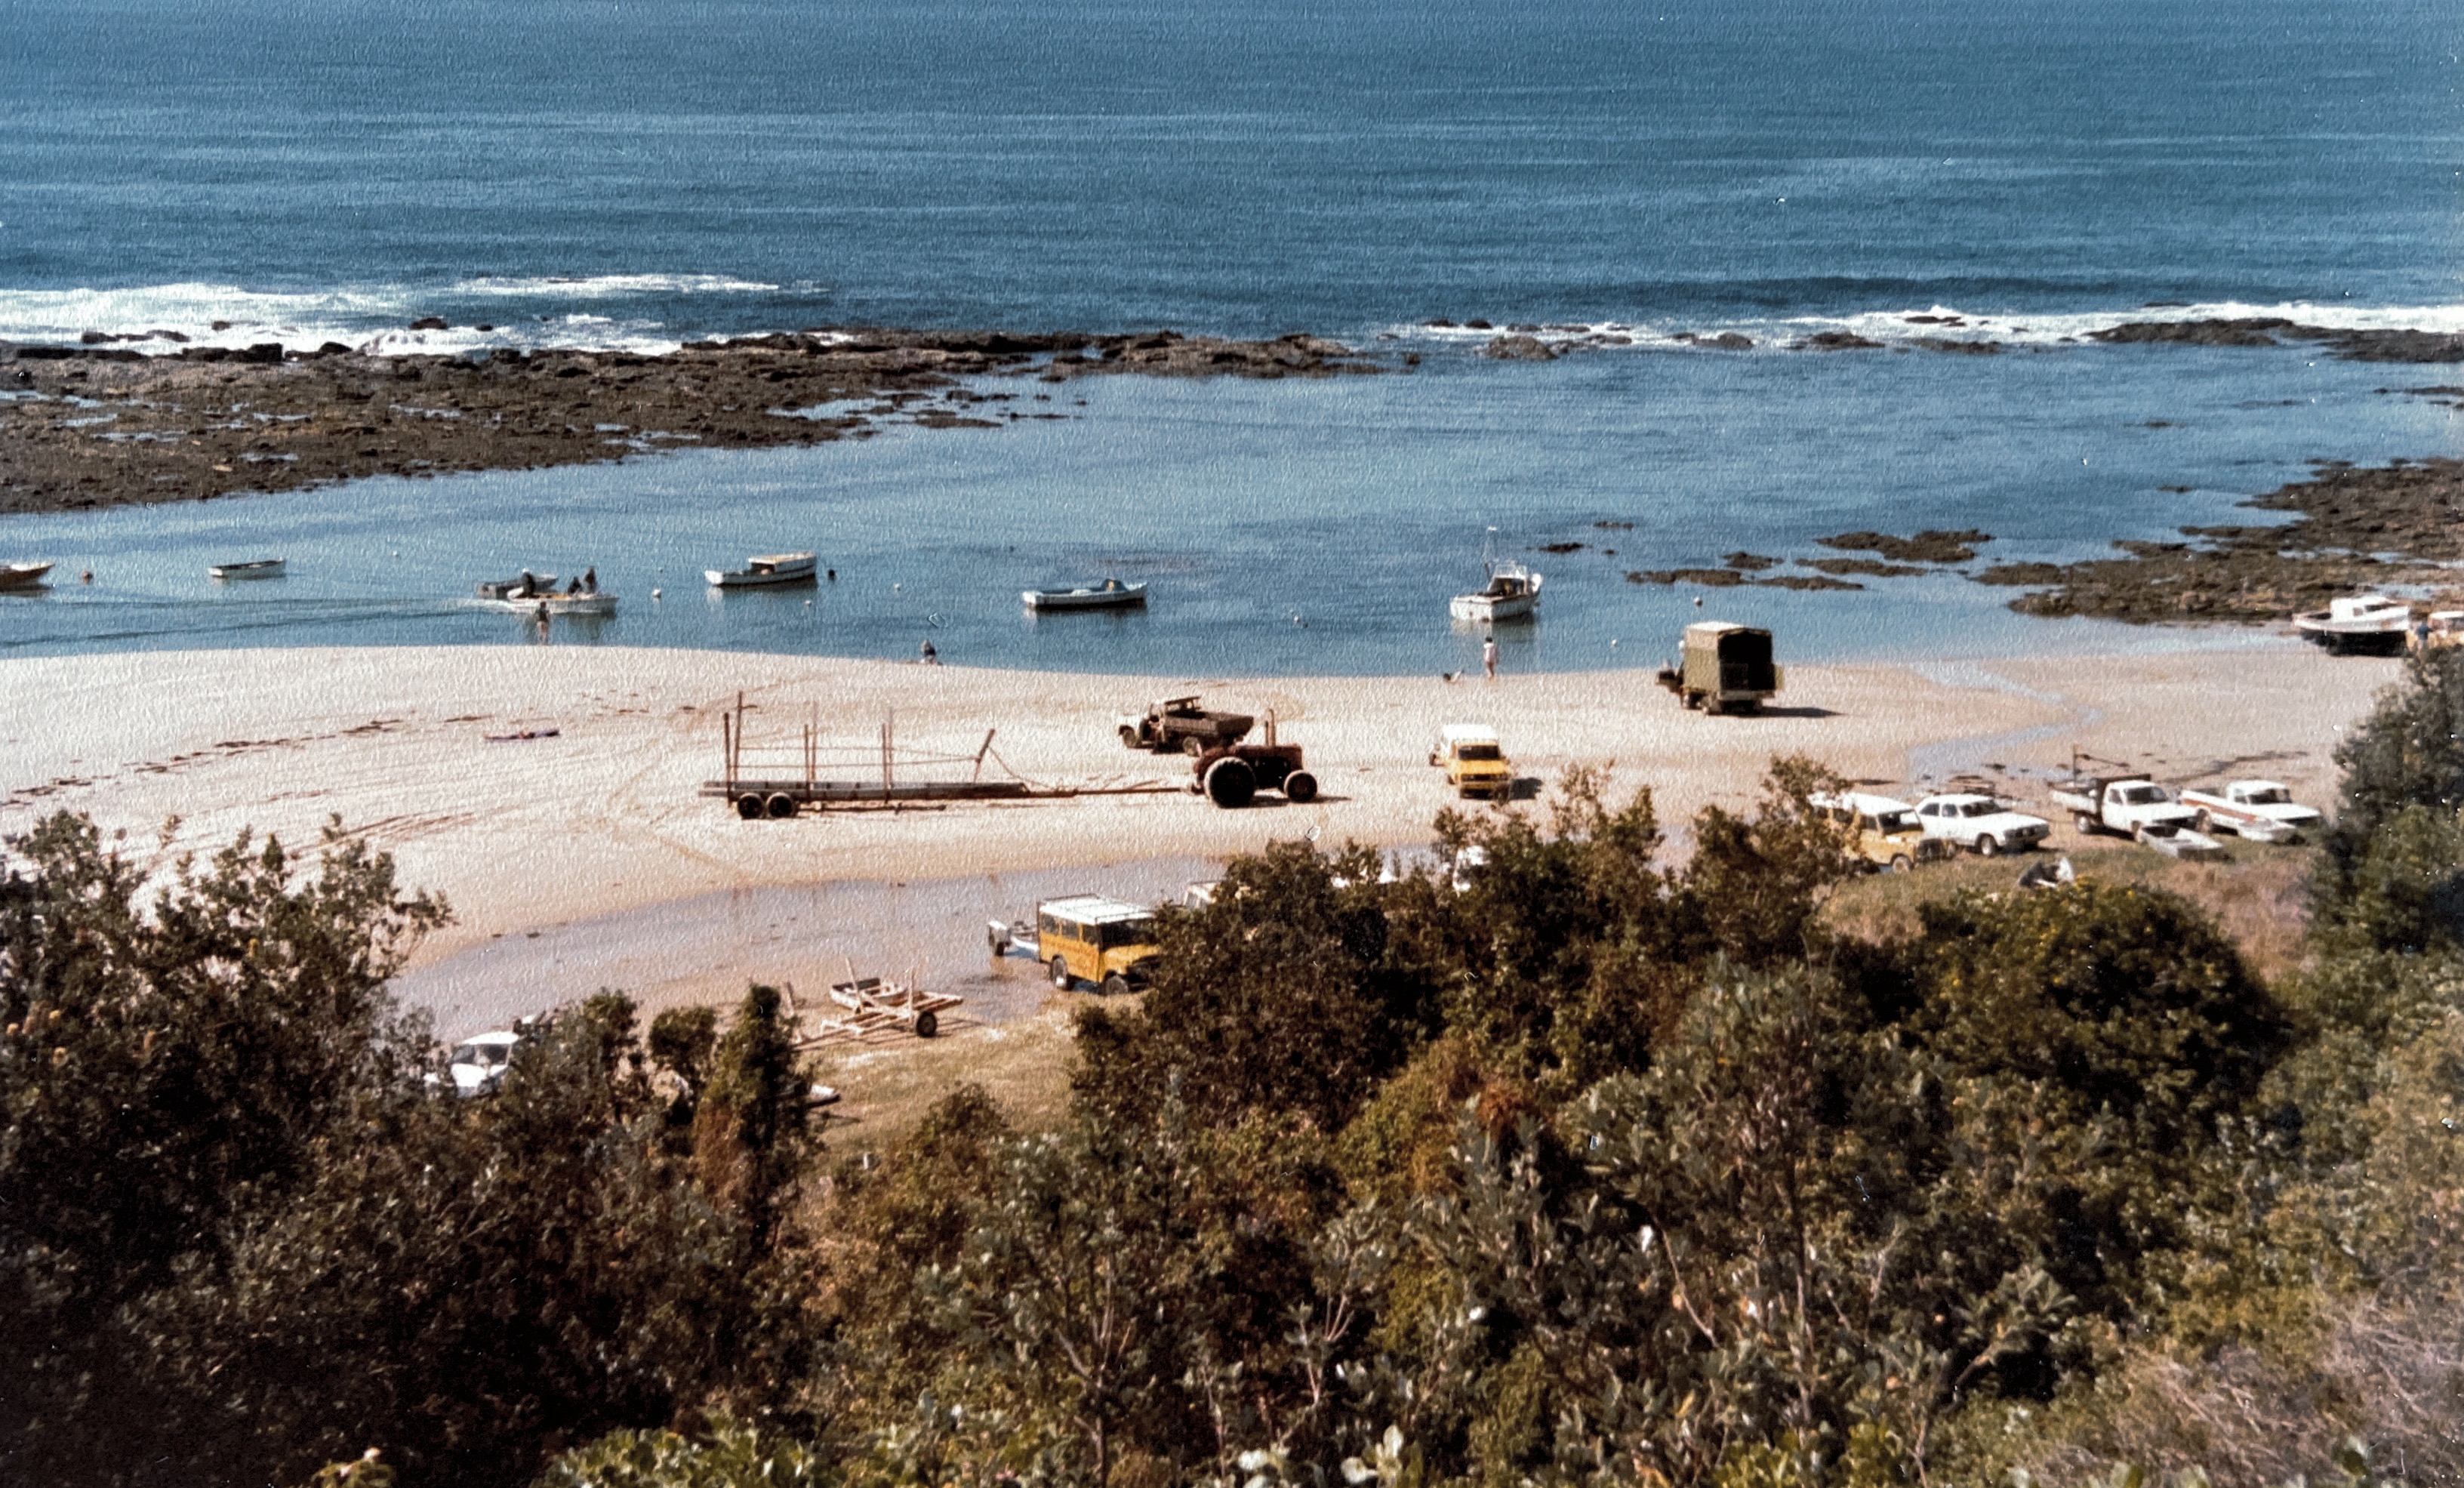 Minnie Bay with licences fishing boats on anchor. 1984